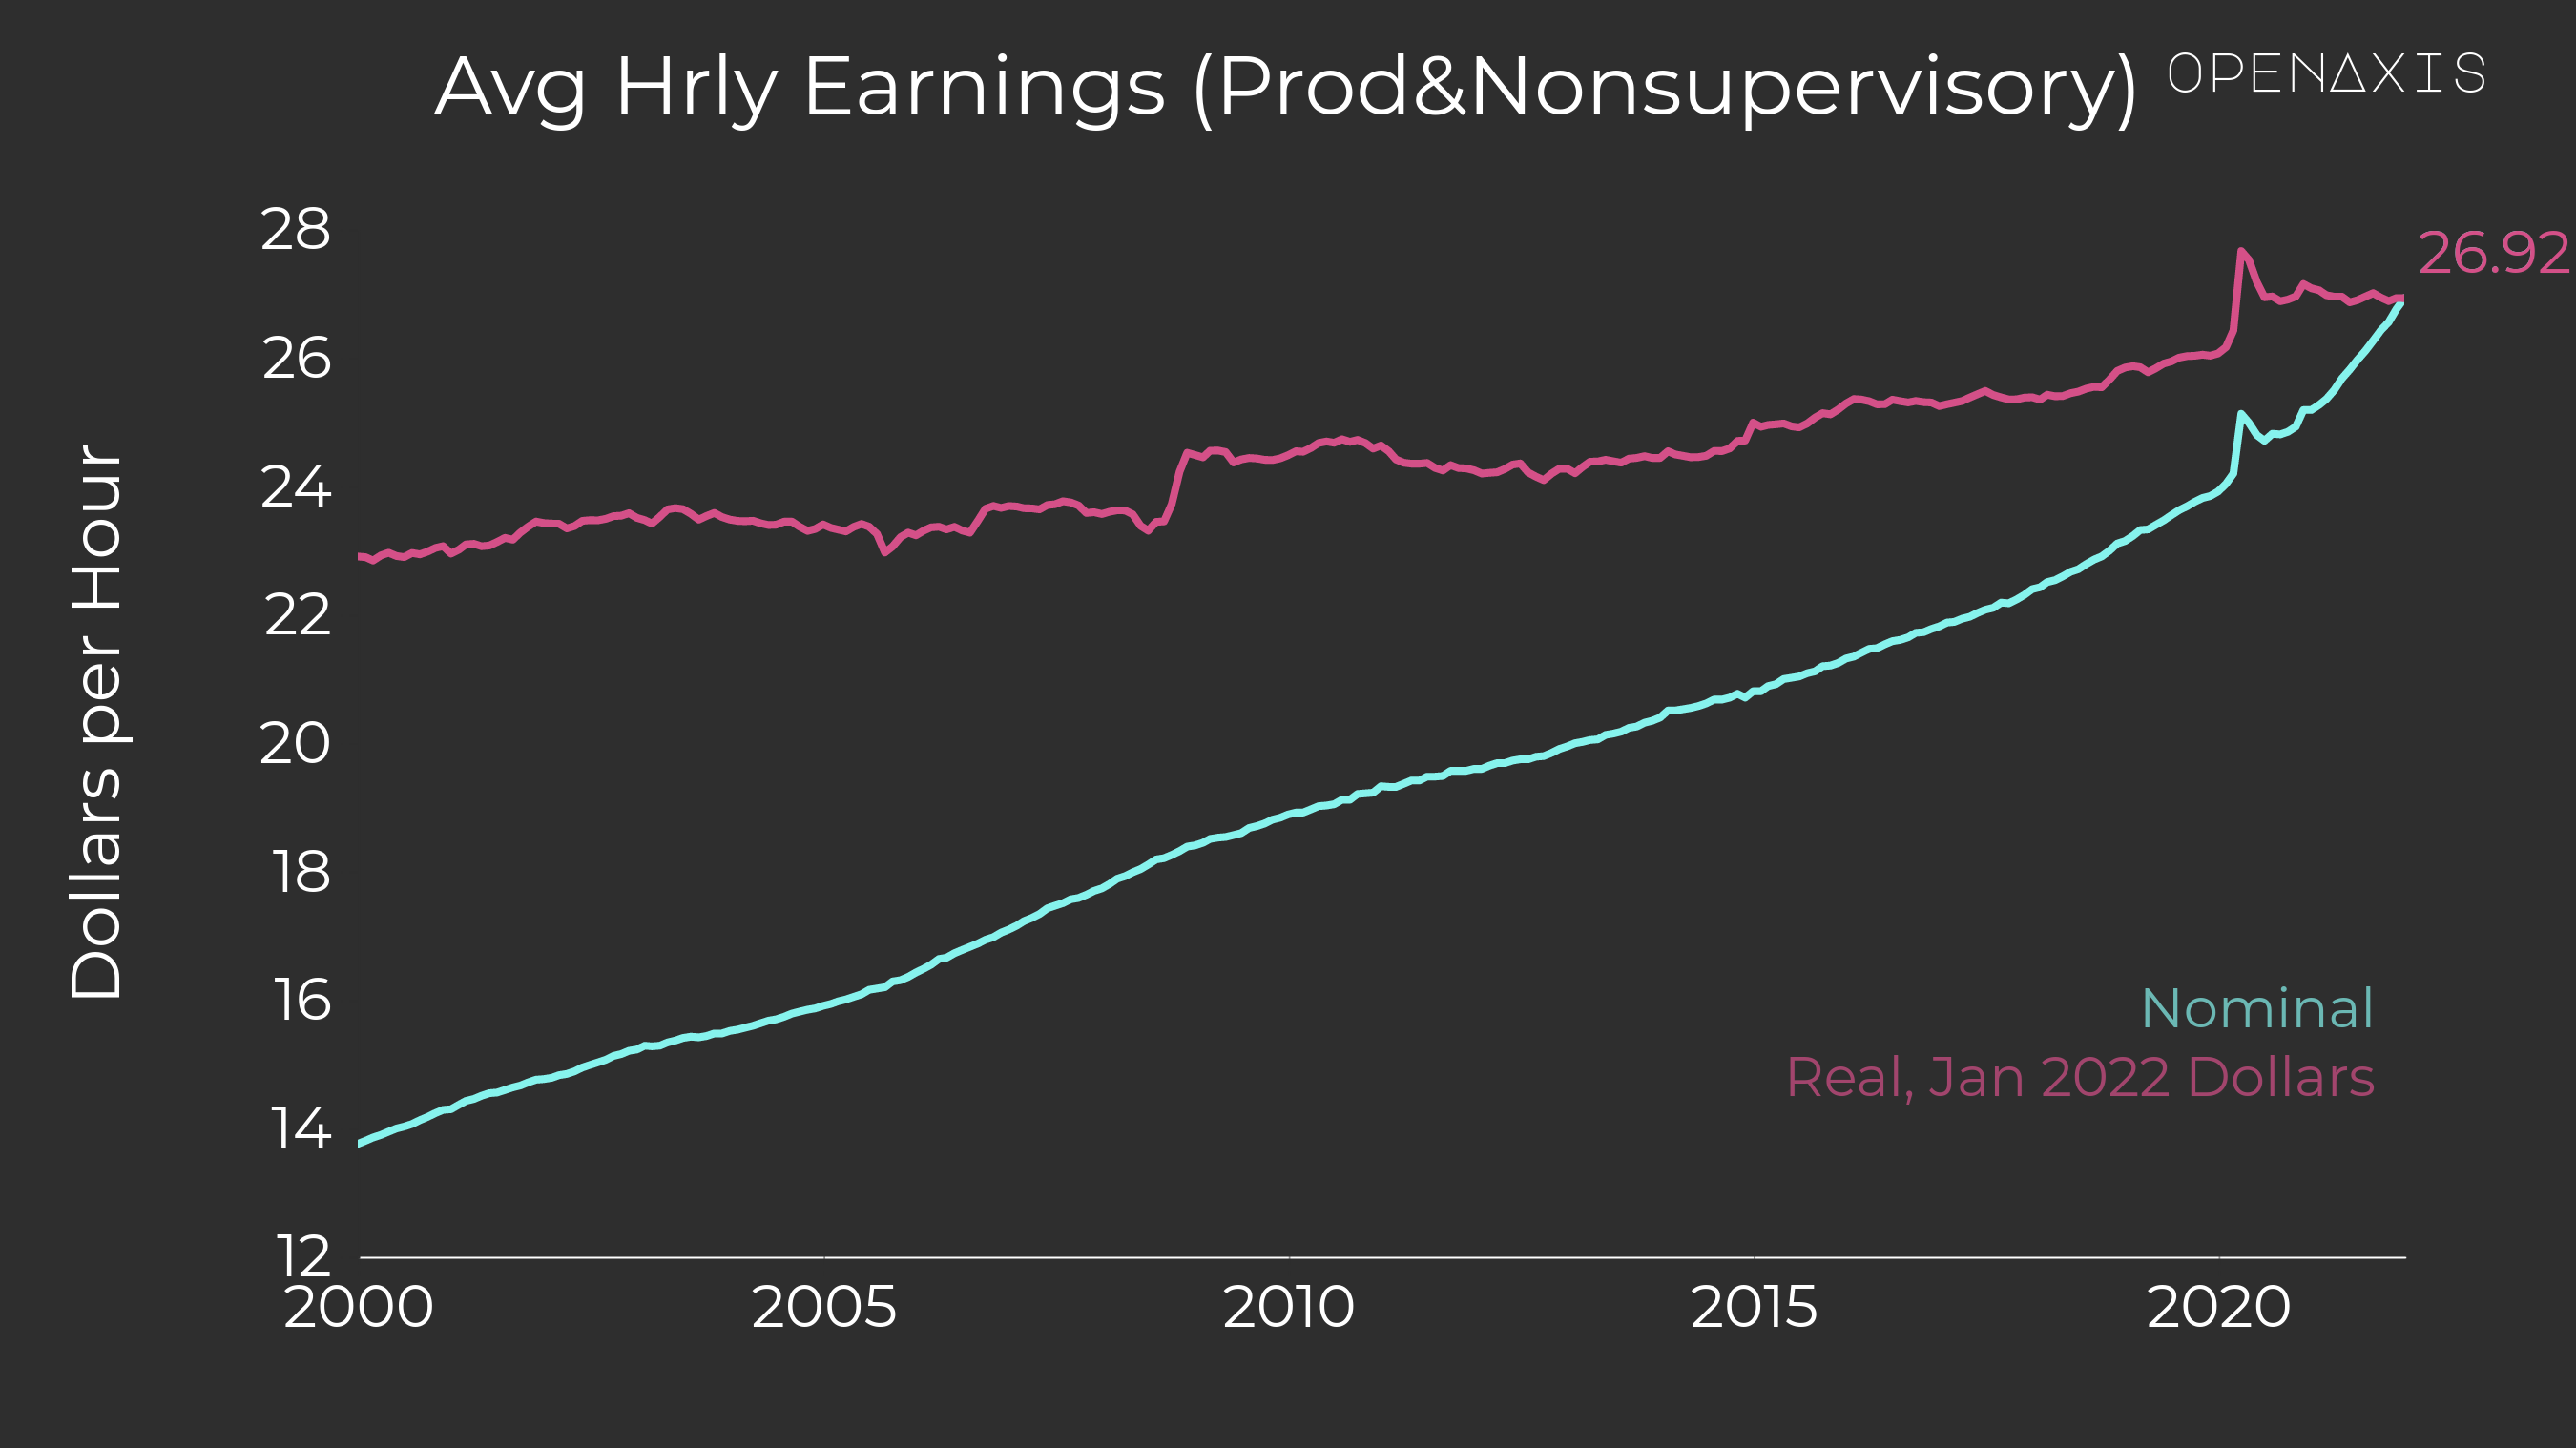 <p>In real terms, Average Hourly Earnings relatively high compared to the last 20 years.</p><p>﻿<a href="/search?q=%23economy" target="_self">#economy</a>﻿ ﻿<a href="/search?q=%23sotu" target="_self">#sotu</a>﻿ ﻿<a href="/search?q=%23fred" target="_self">#fred</a>﻿ </p><p><br /></p><p><a href="https://app.openaxis.com/projects/openaxis/State-of-the-Union-2022" target="_blank">Return to State of the Union 2022 project by OpenAxis</a>﻿</p>